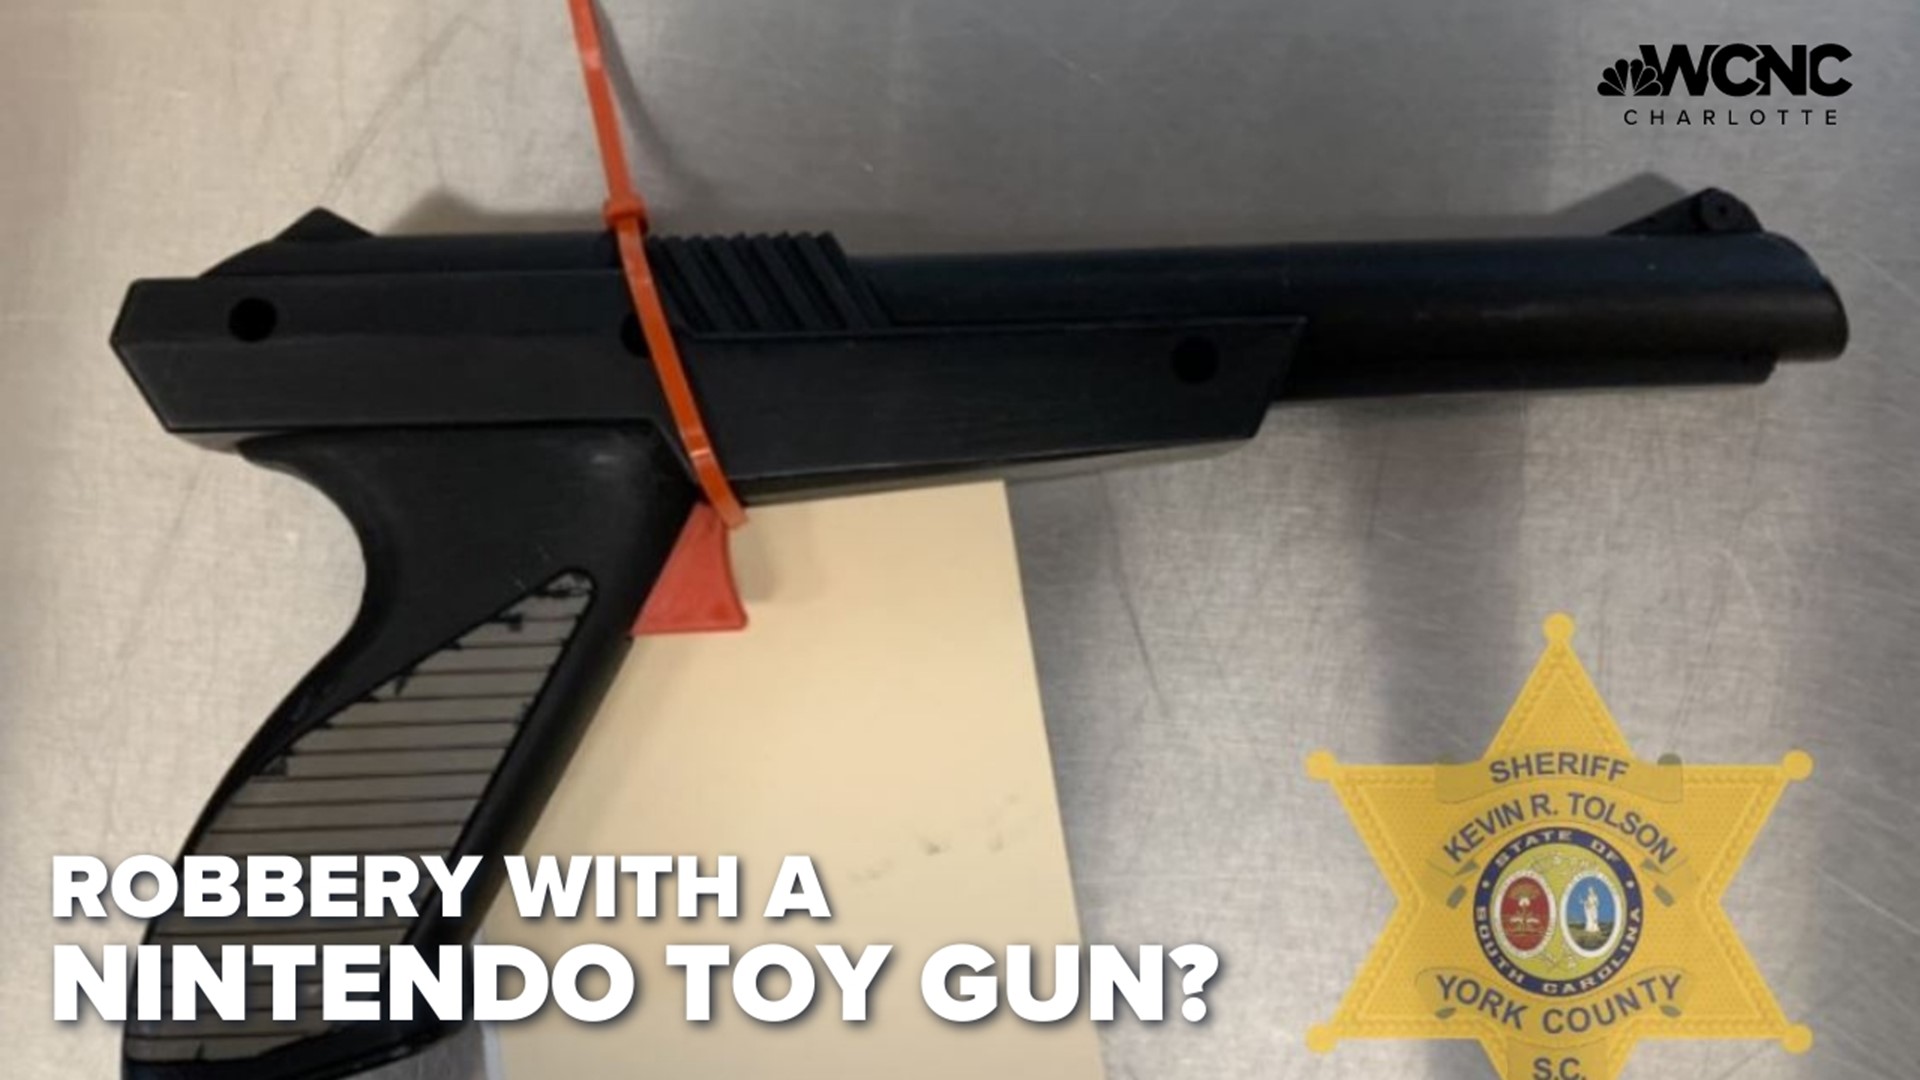 Deputies said the classic NES Zapper was spray-painted black to look more realistic.